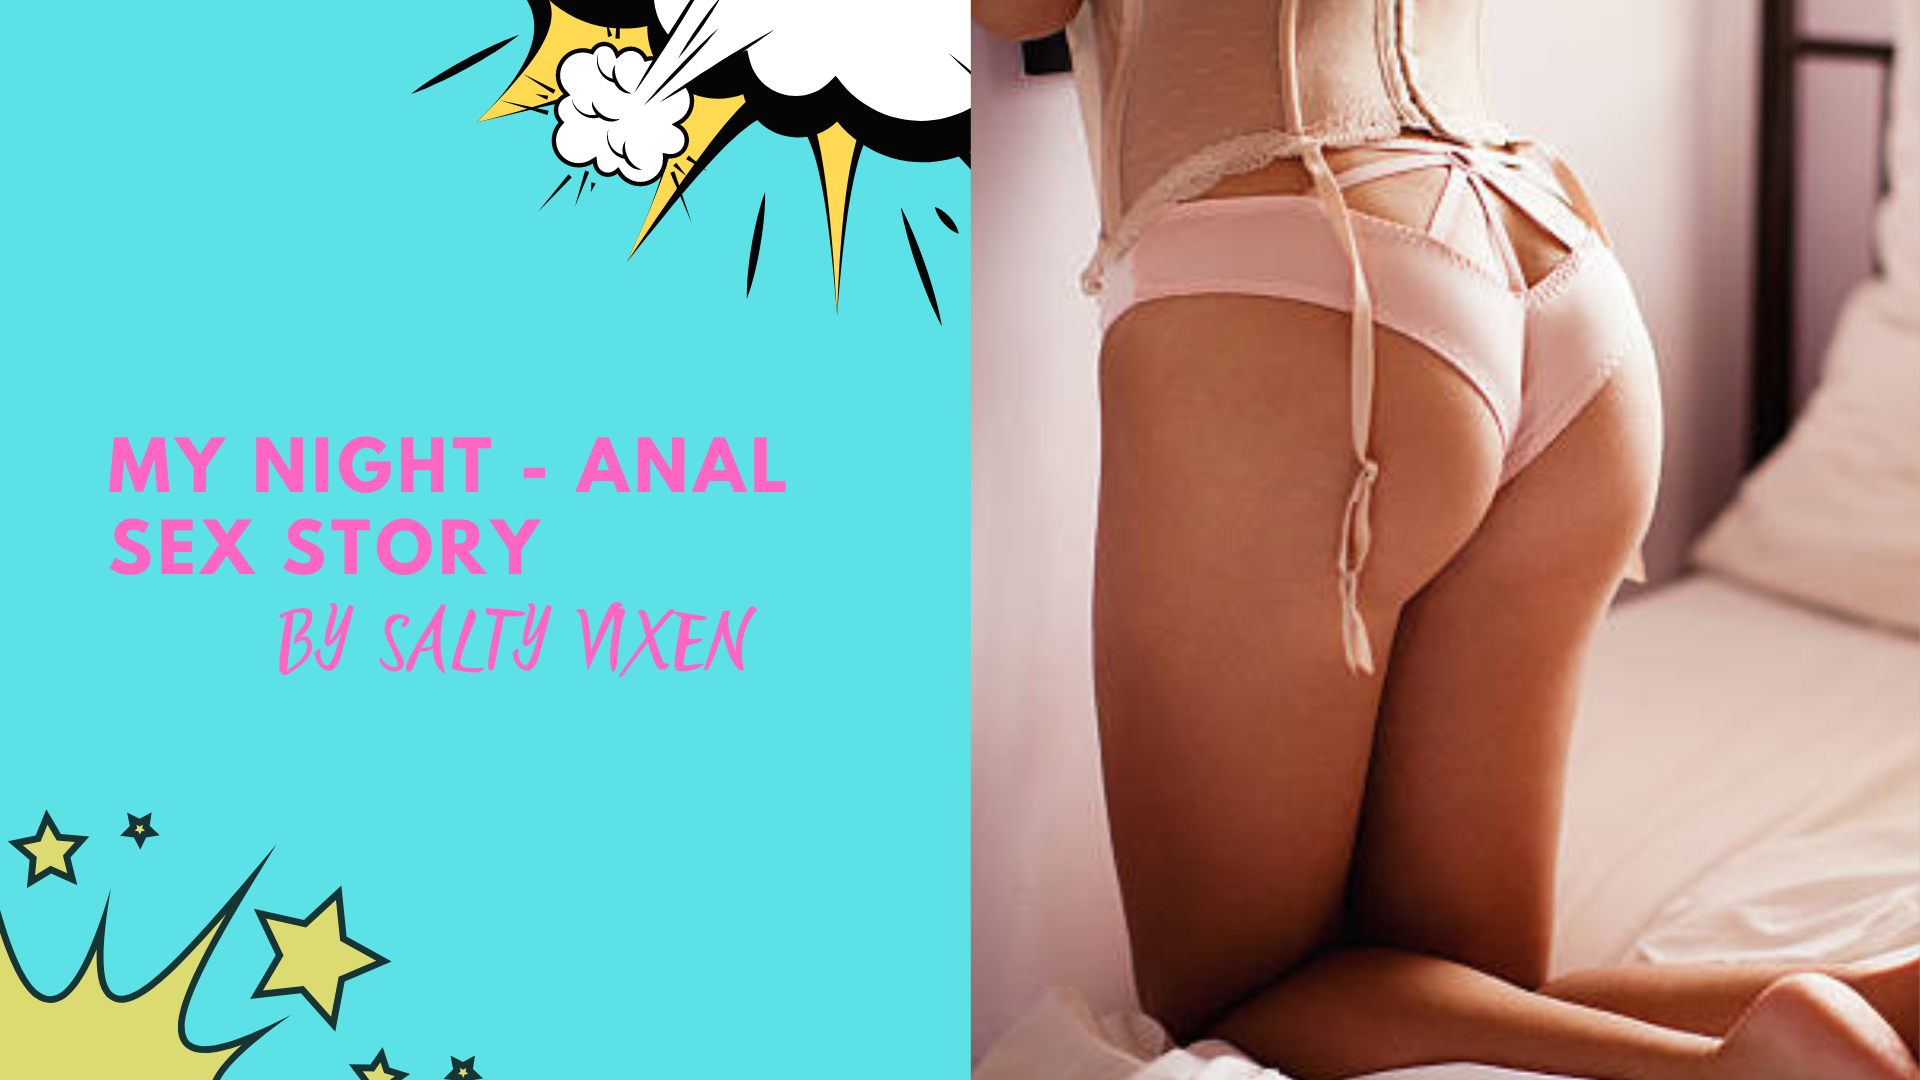 My Night - My First Anal Sex Audio Story (M-F) ~ Salty Vixen Stories & More